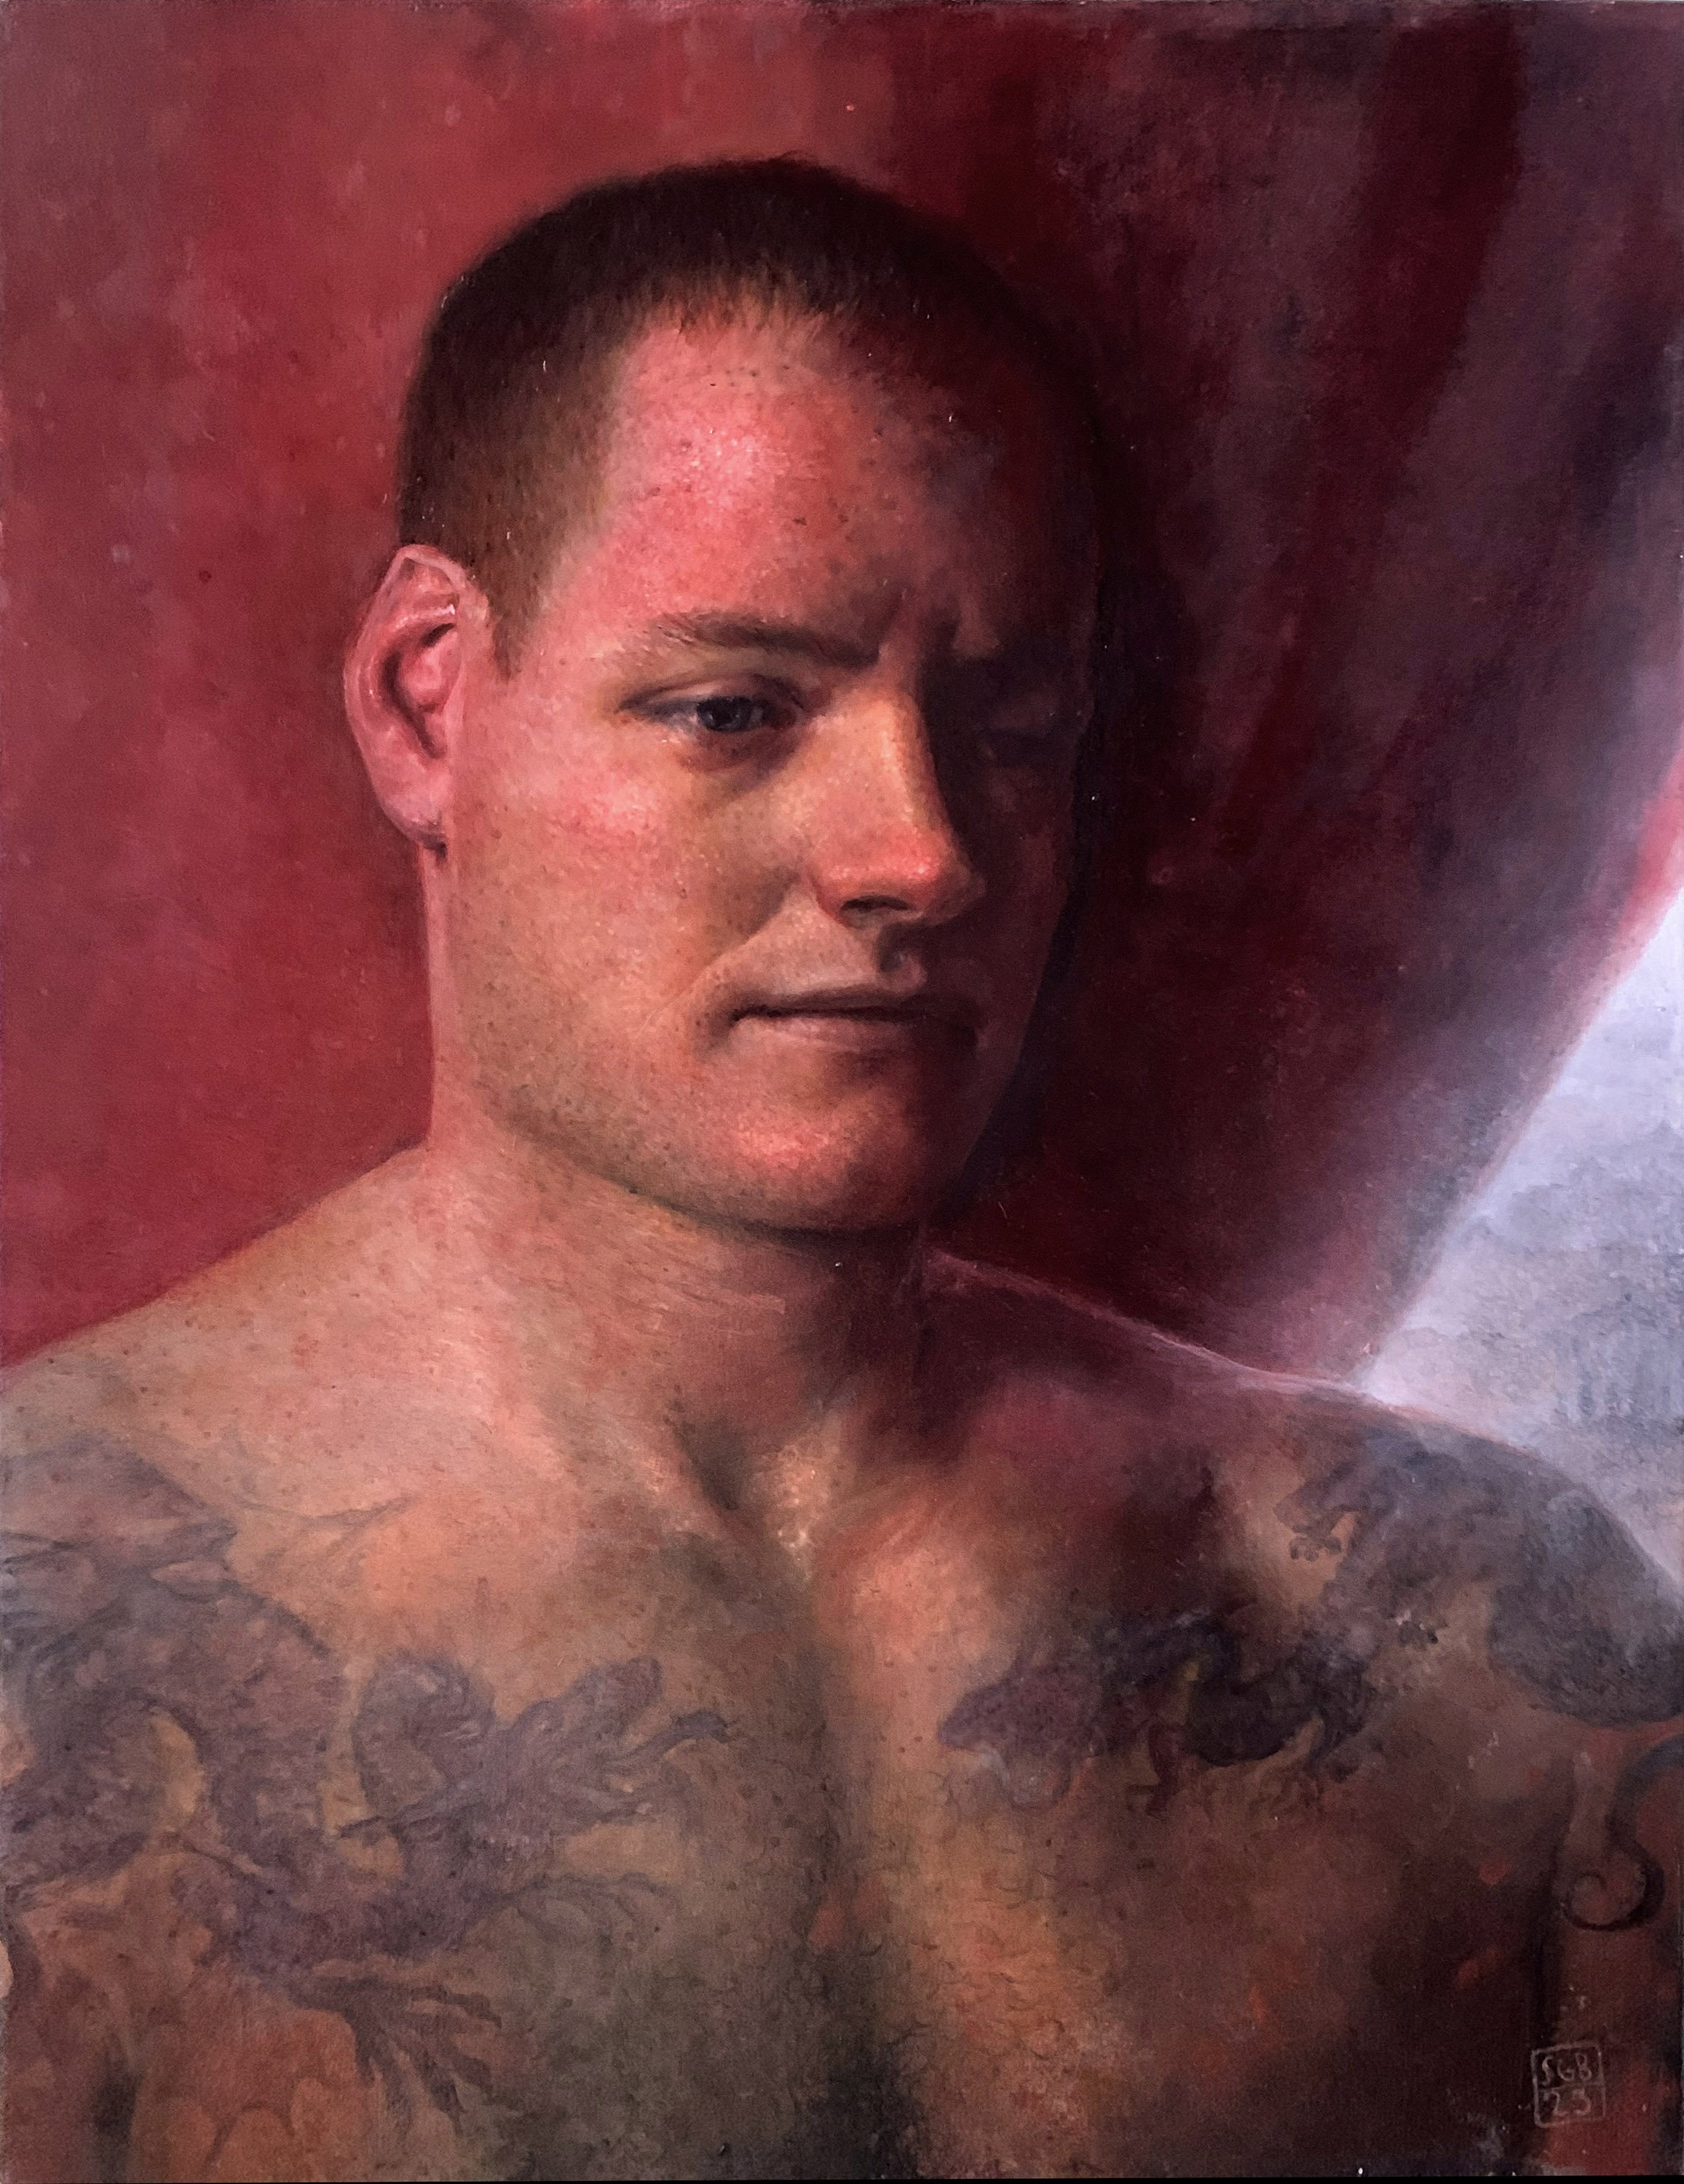   The Ginger with the Dragon Tattoo   20 x 16 inches  Oil on canvas 